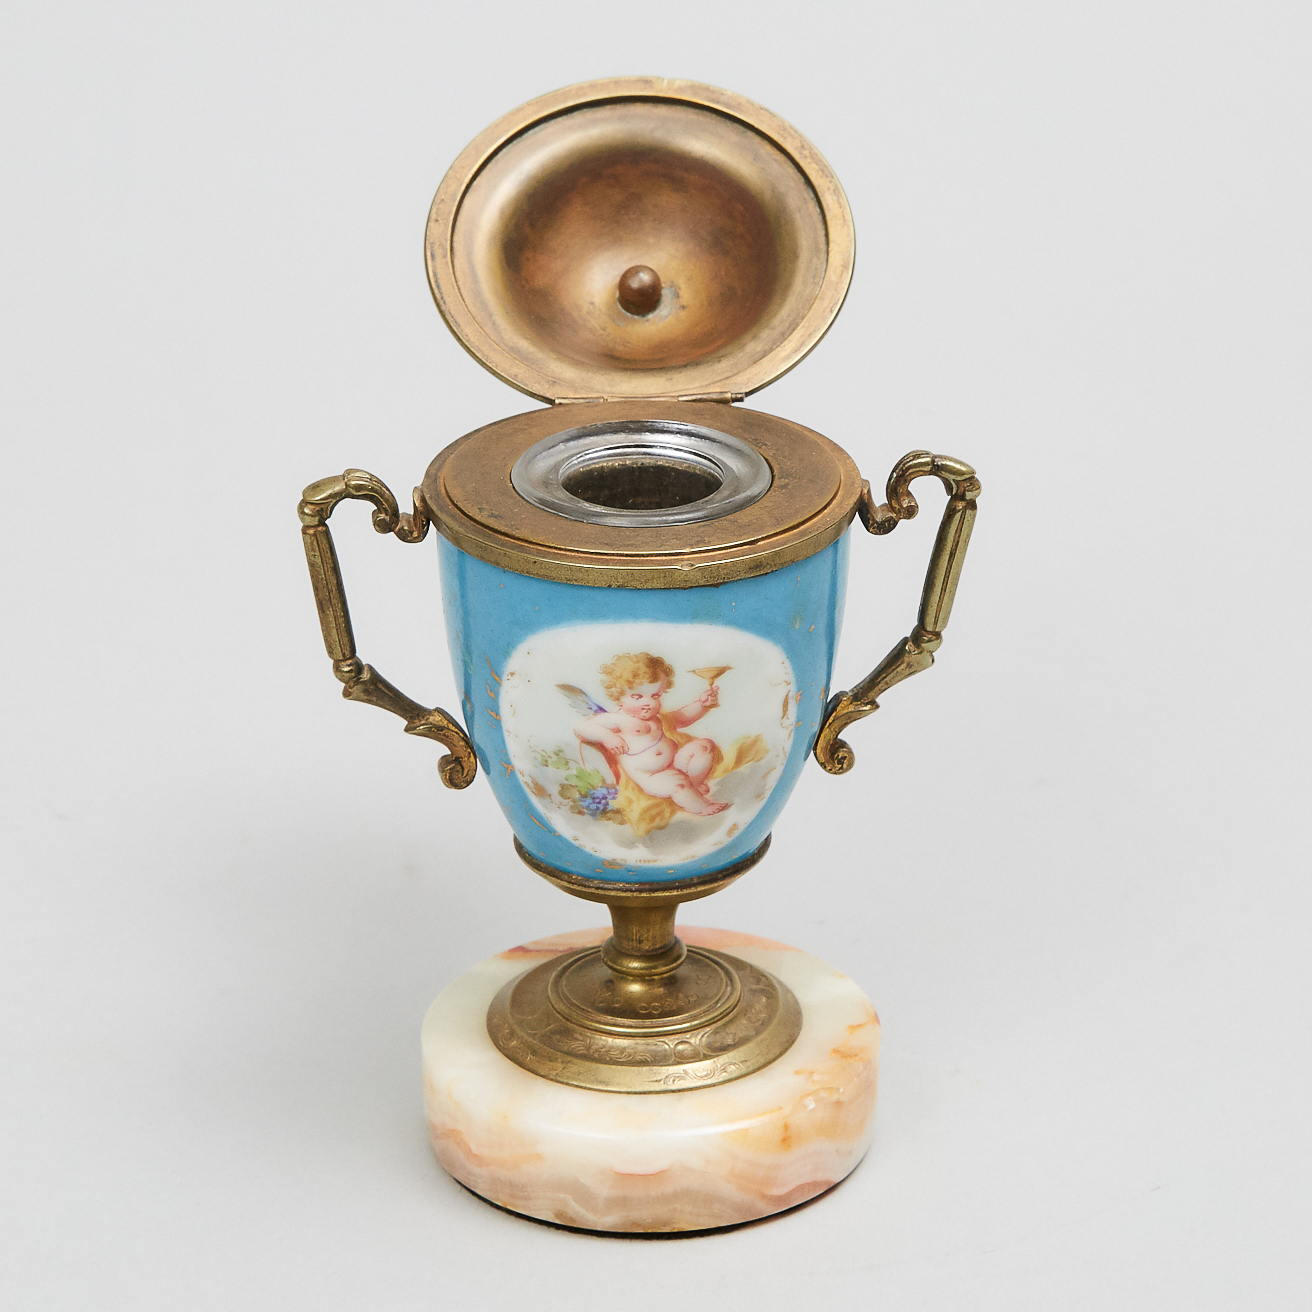 French Ormolu Mounted Sevres Style Porcelain Urn Form Inkwell, early 20th century